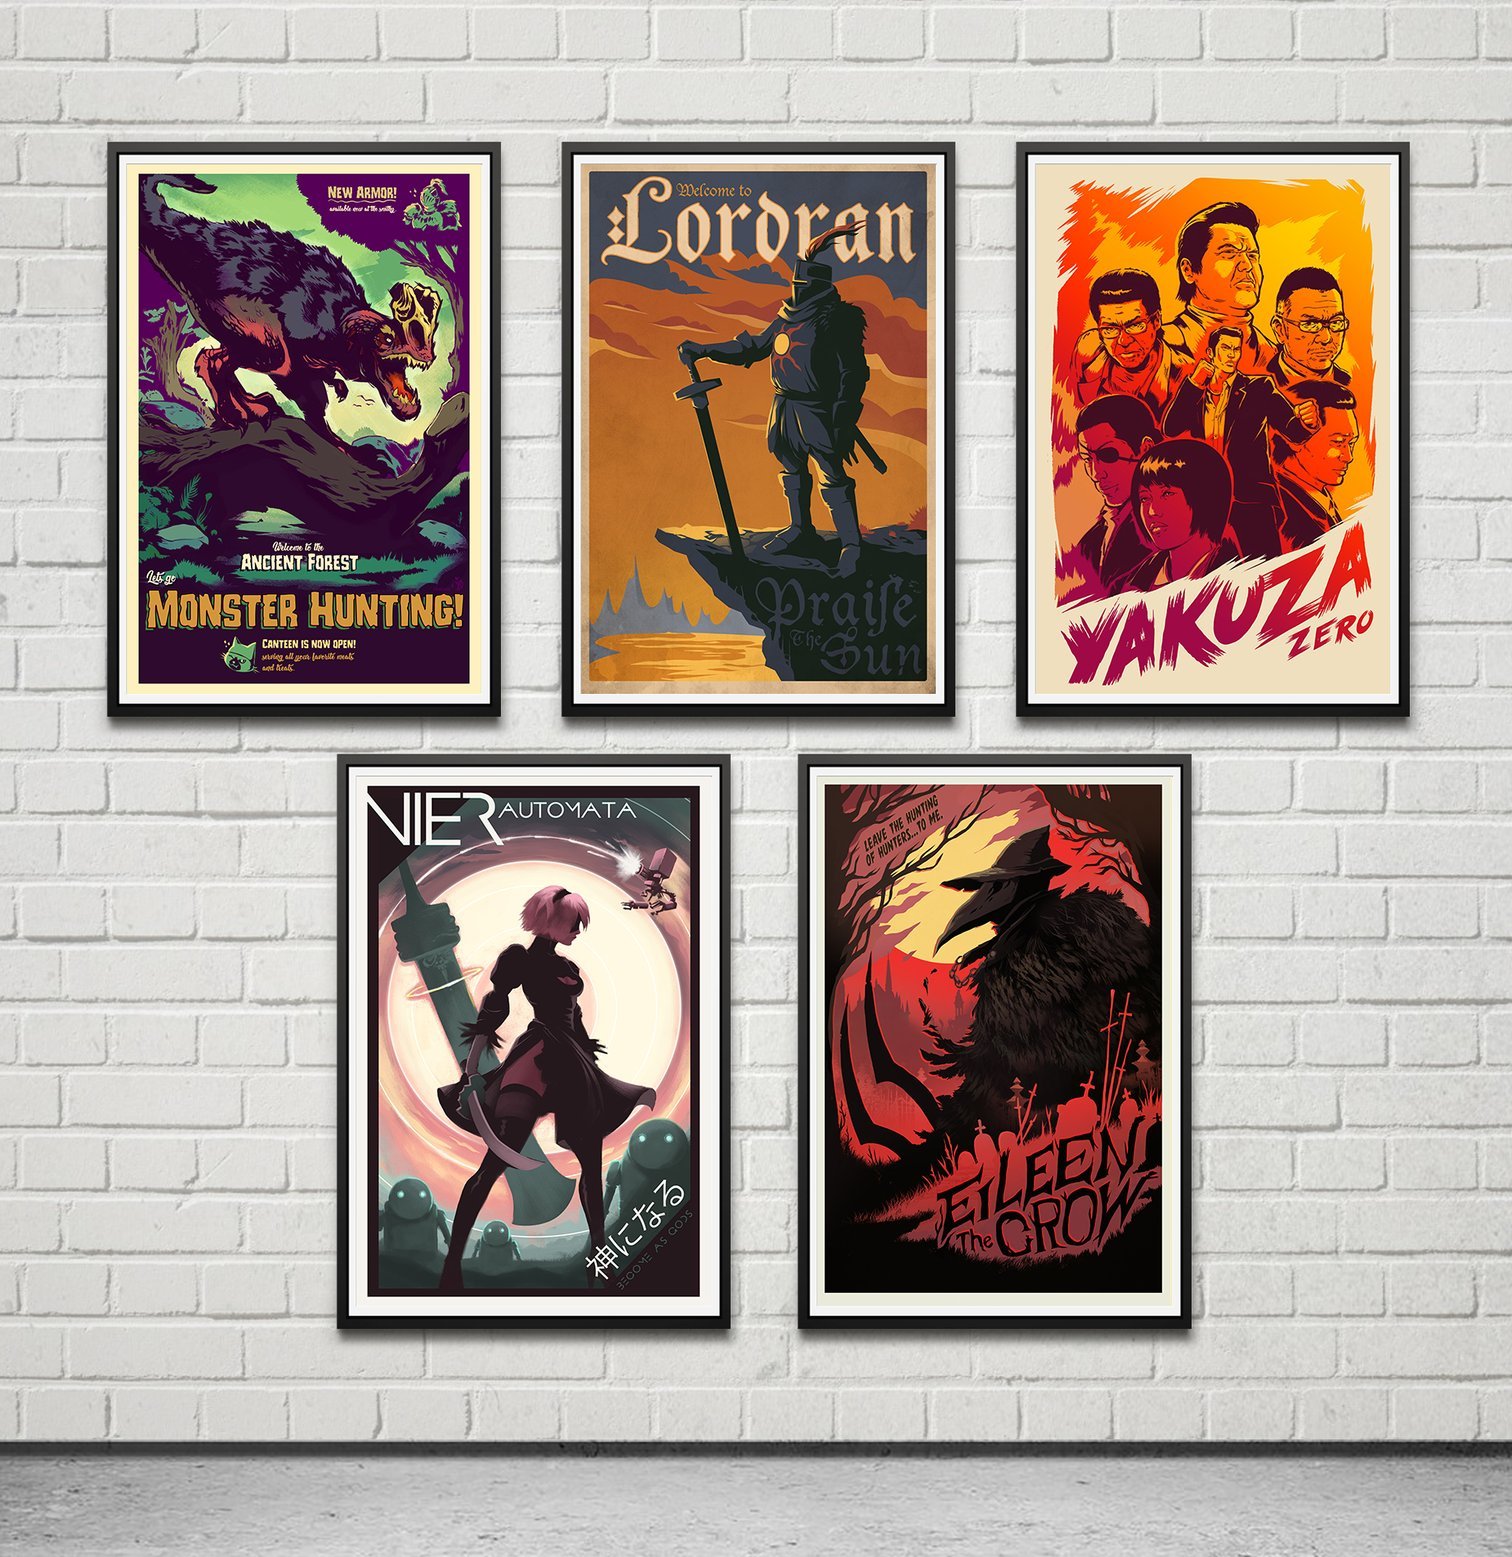 Video Game posters from Crowsmack.com